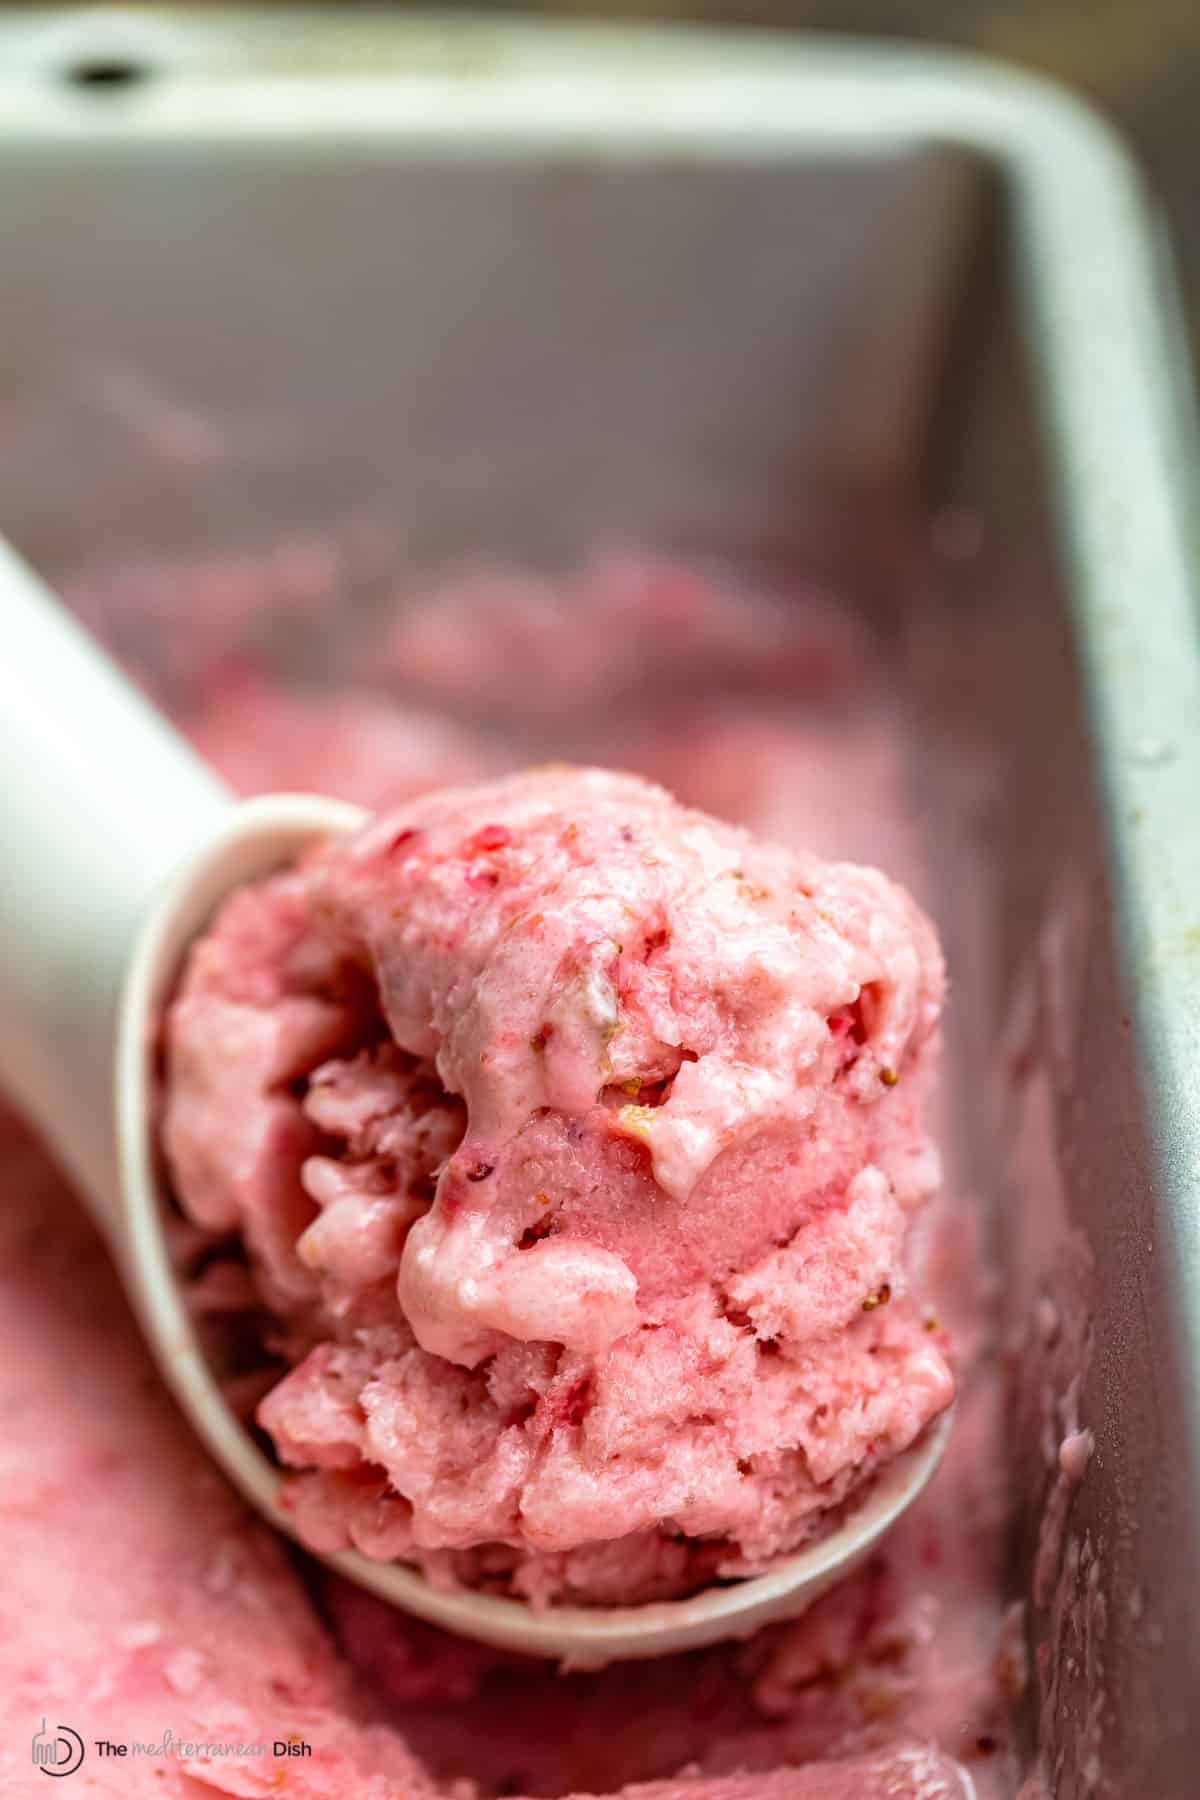 The Best Way to Store Ice Cream in Your Freezer